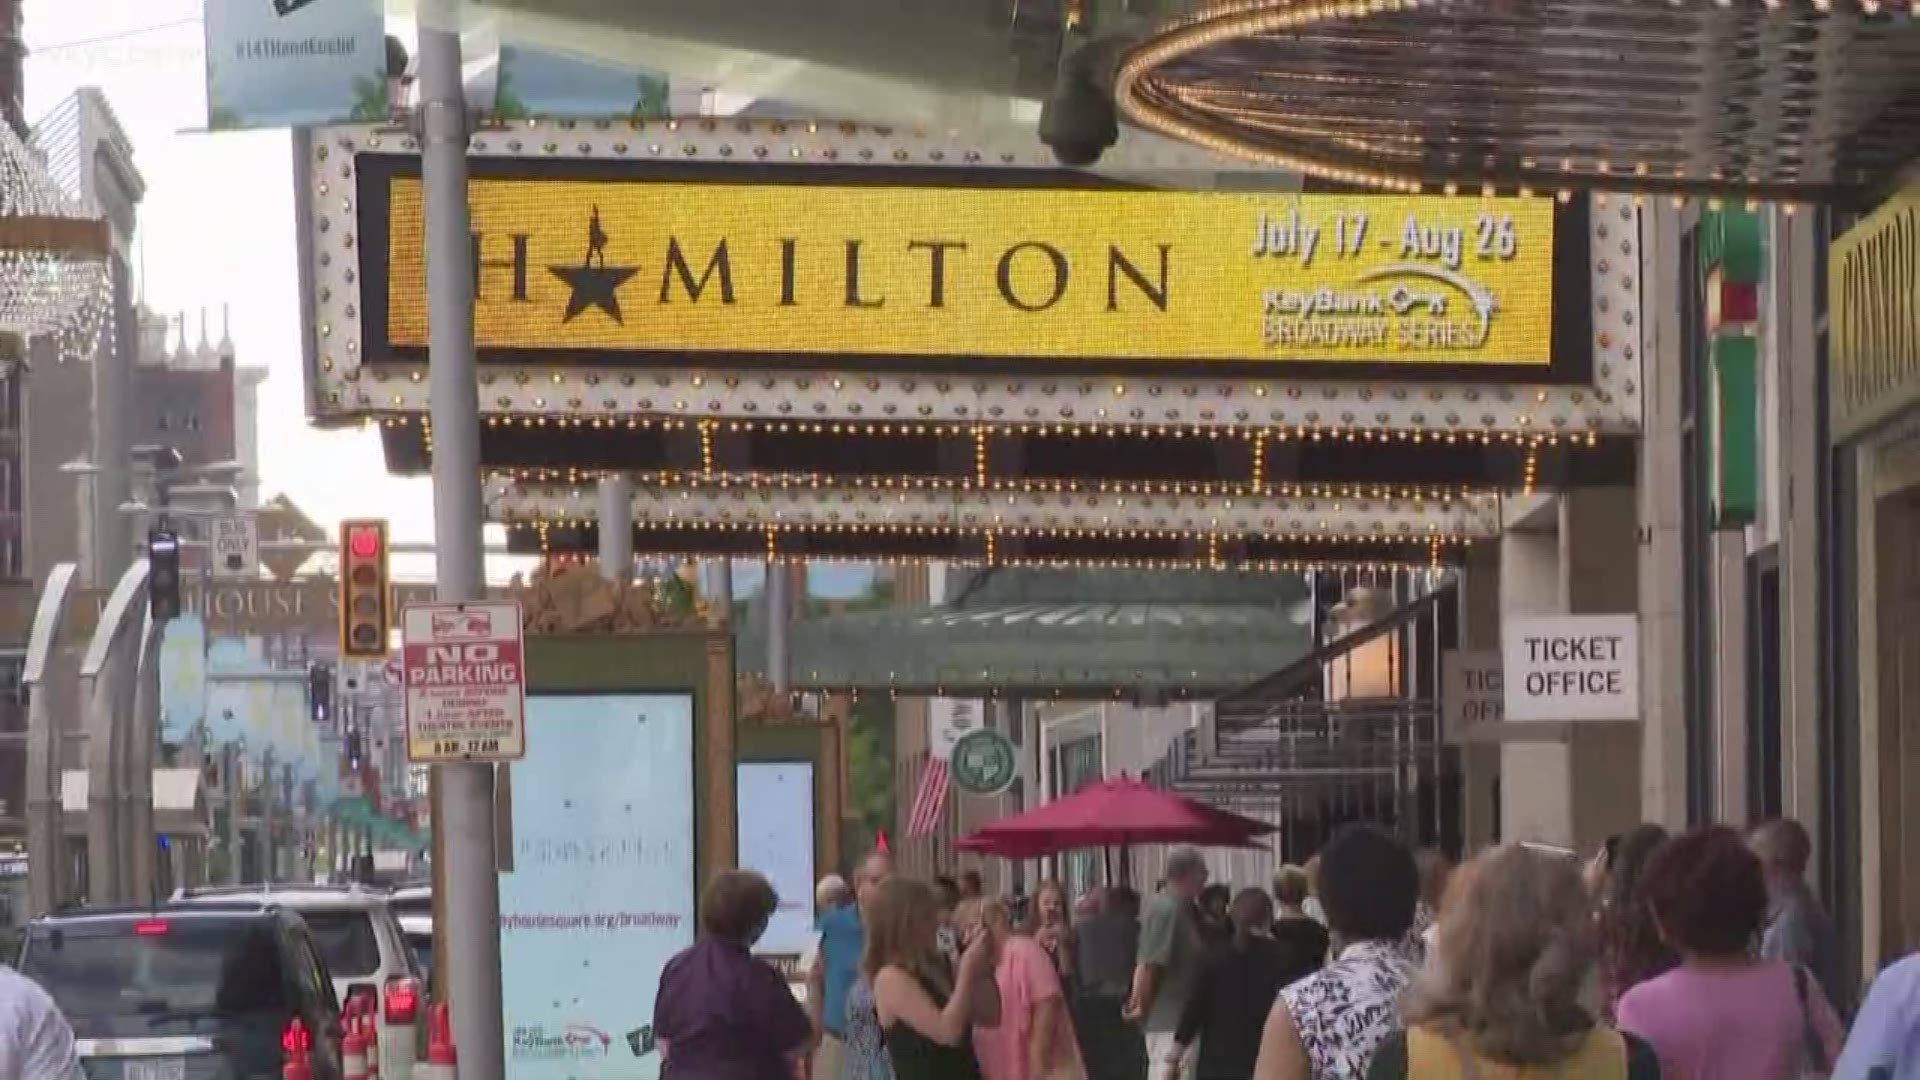 Hamilton takes on Playhouse Square and how you can get $10 tickets